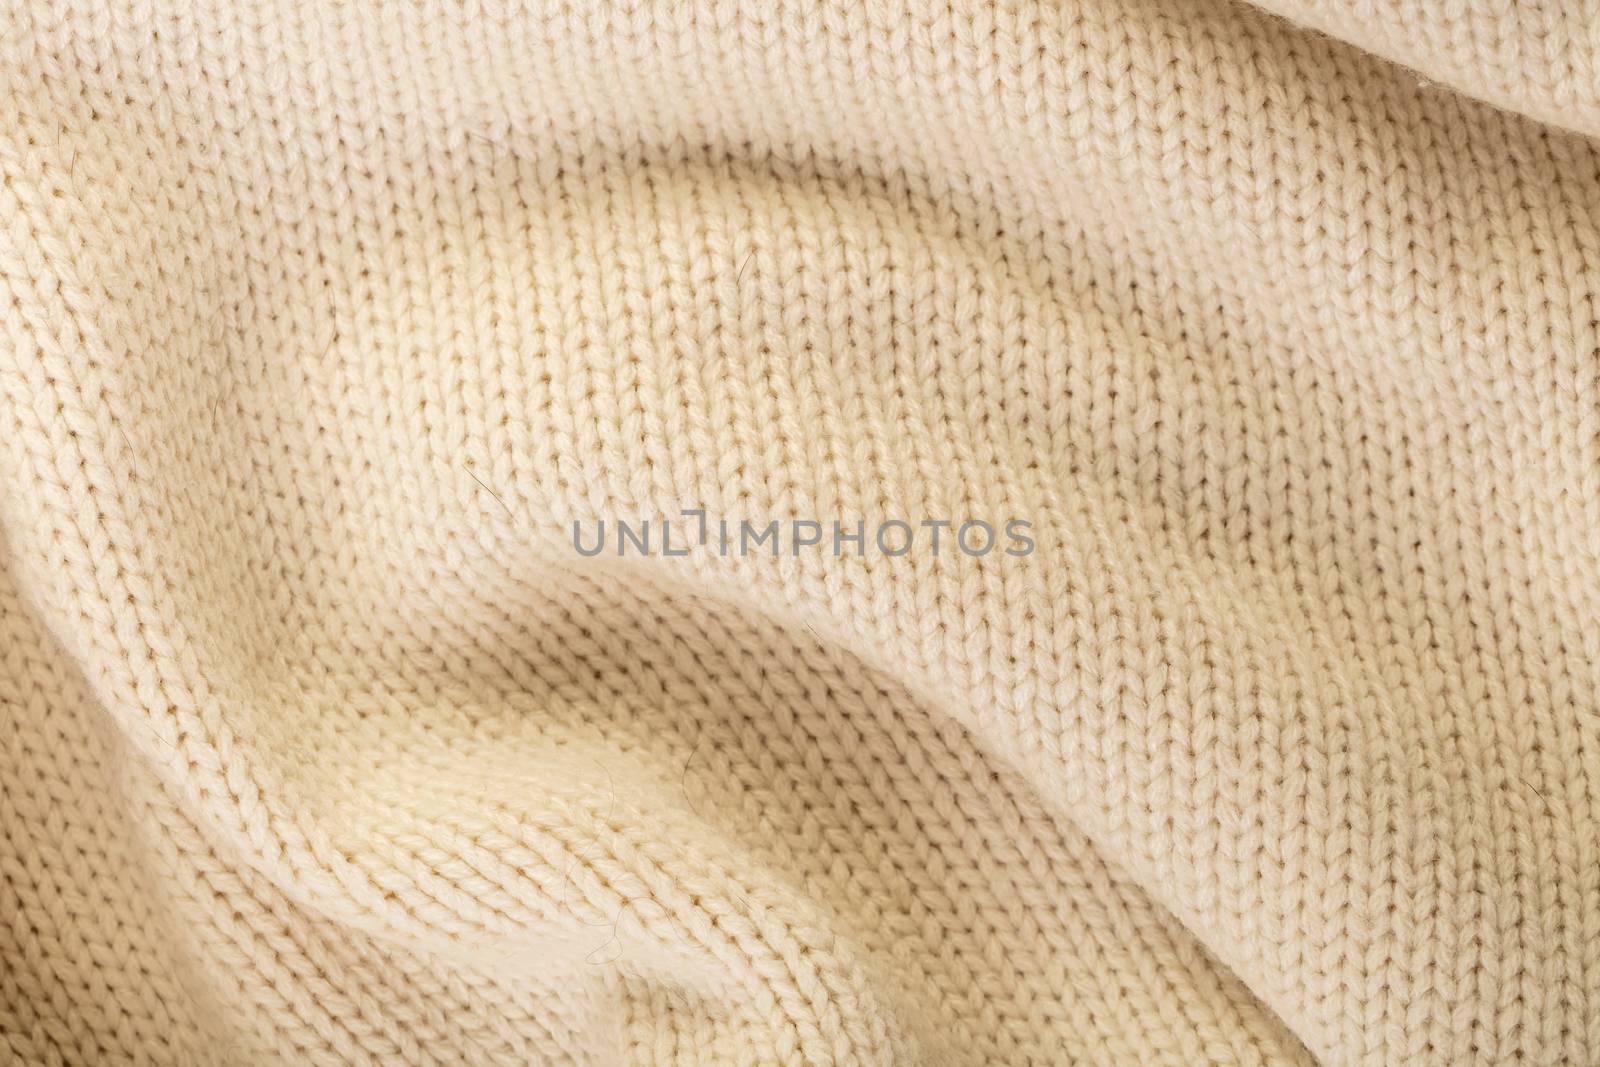 woolen knitted fabric close-up by MegaArt